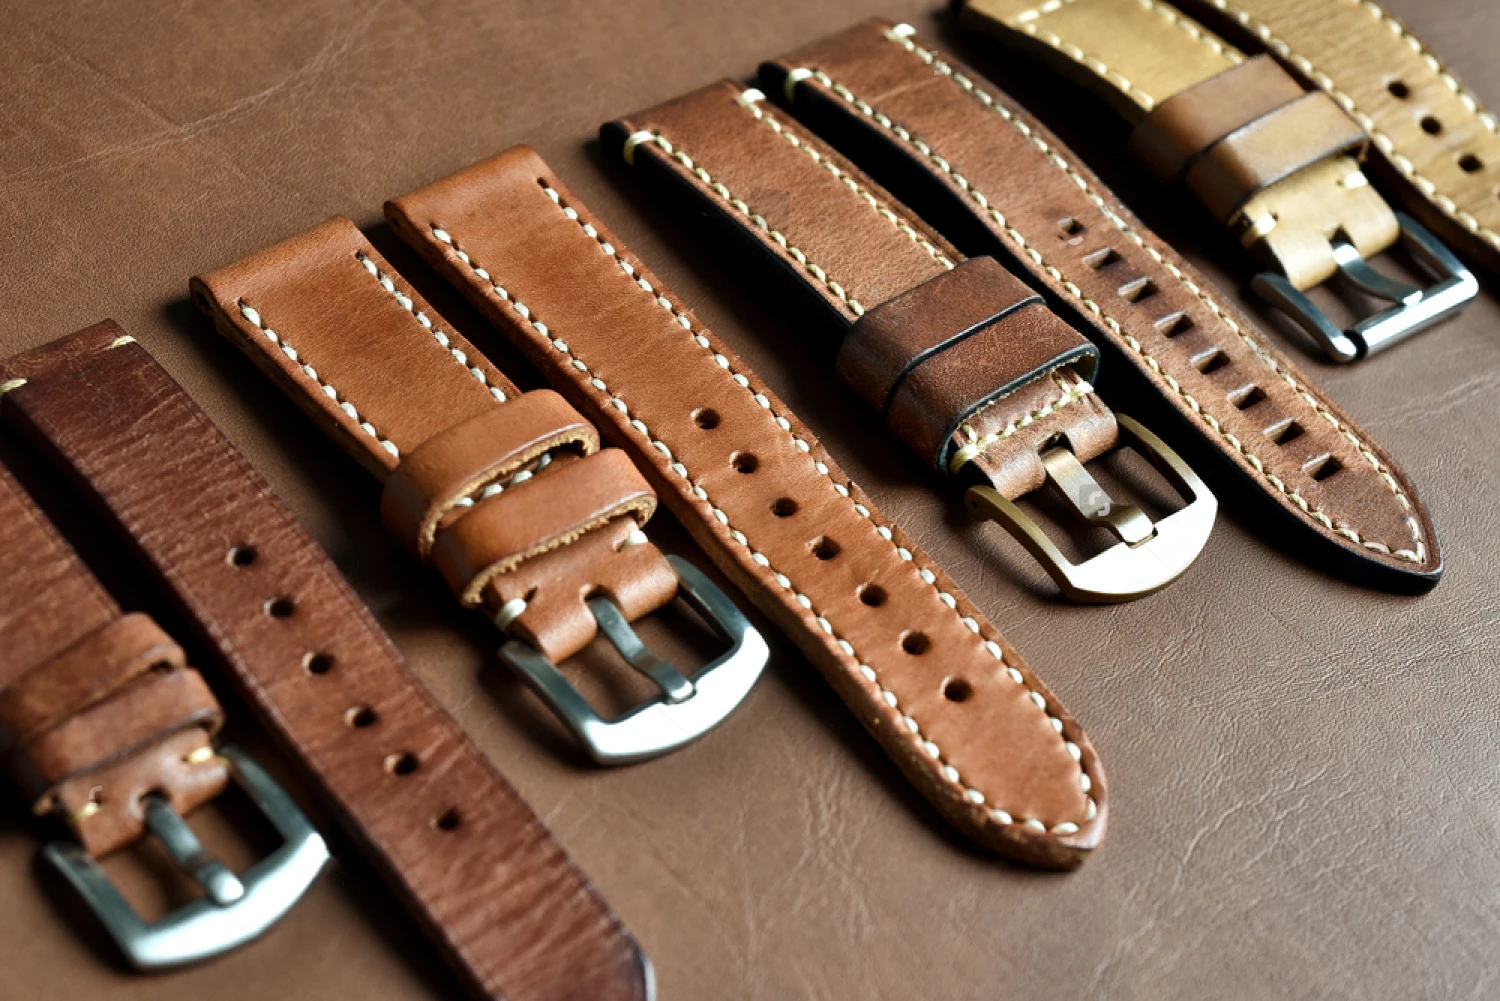 leather watch band strap compatible with all model h-a-m-i-l-t-o-n field / jazzmaster / metal mesh watch band belt enlarge